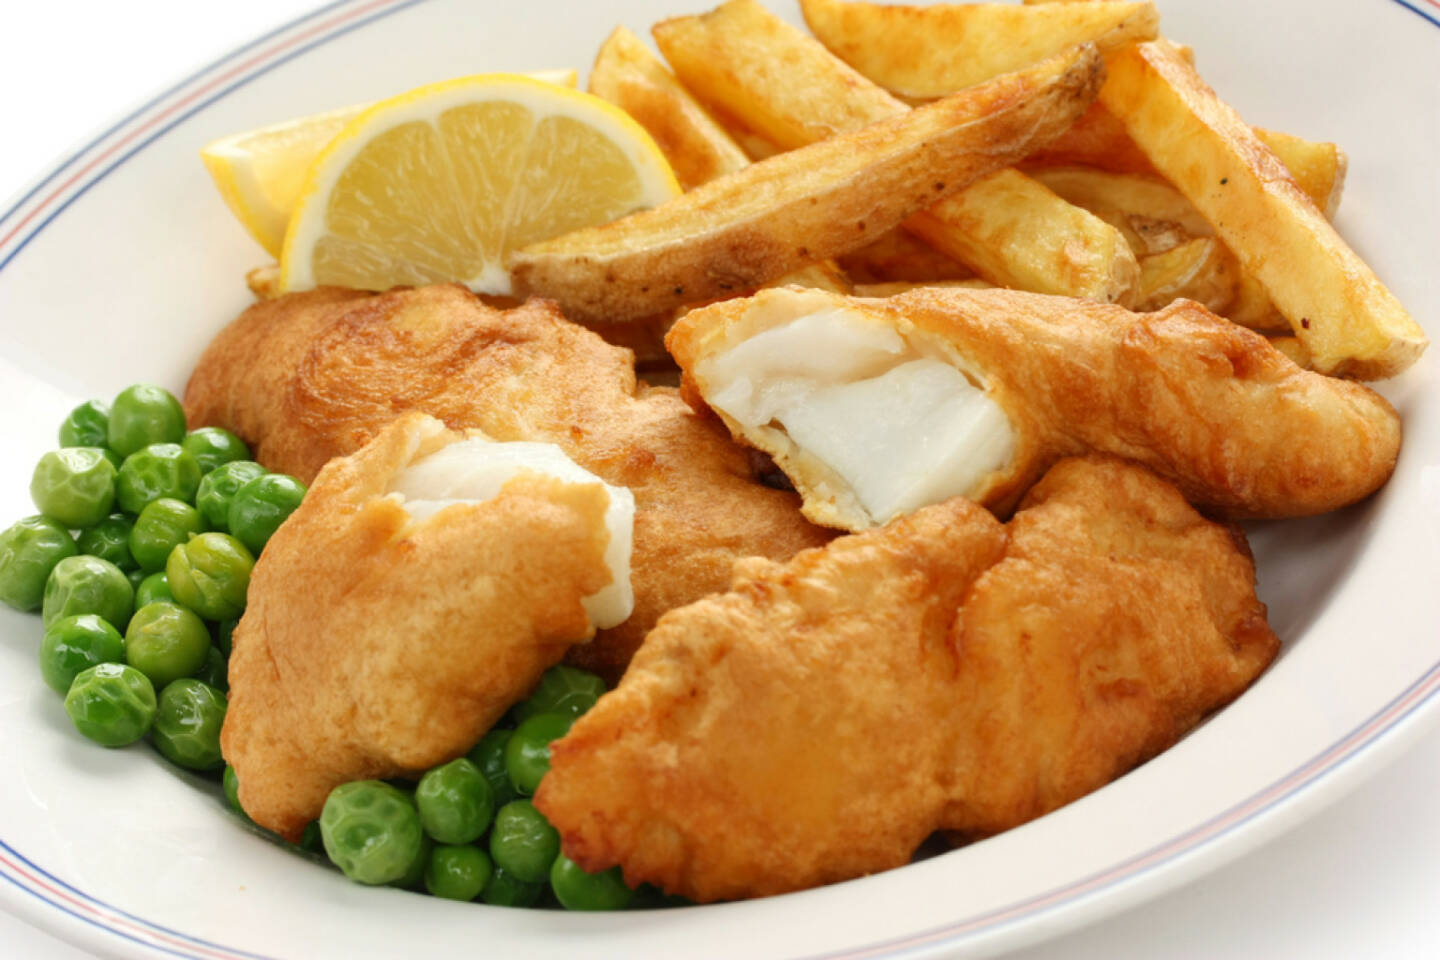 fish & chips, UK, food, Fisch, Erbsen, Pommes frites, http://www.shutterstock.com/de/pic-94482769/stock-photo-fish-and-chips-british-food.html 